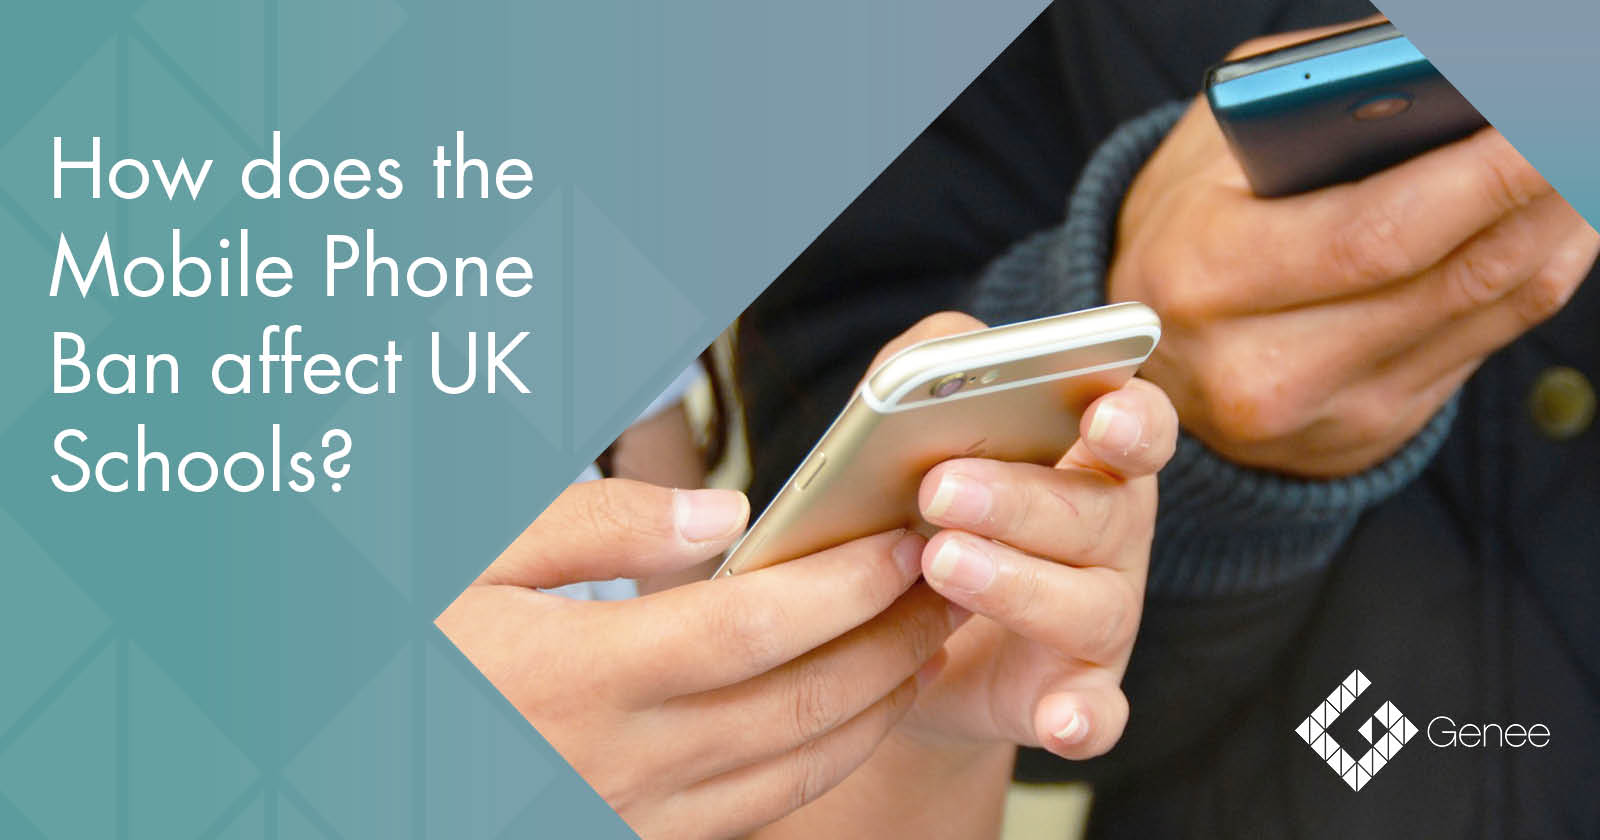 How does the mobile phone ban affect UK schools?